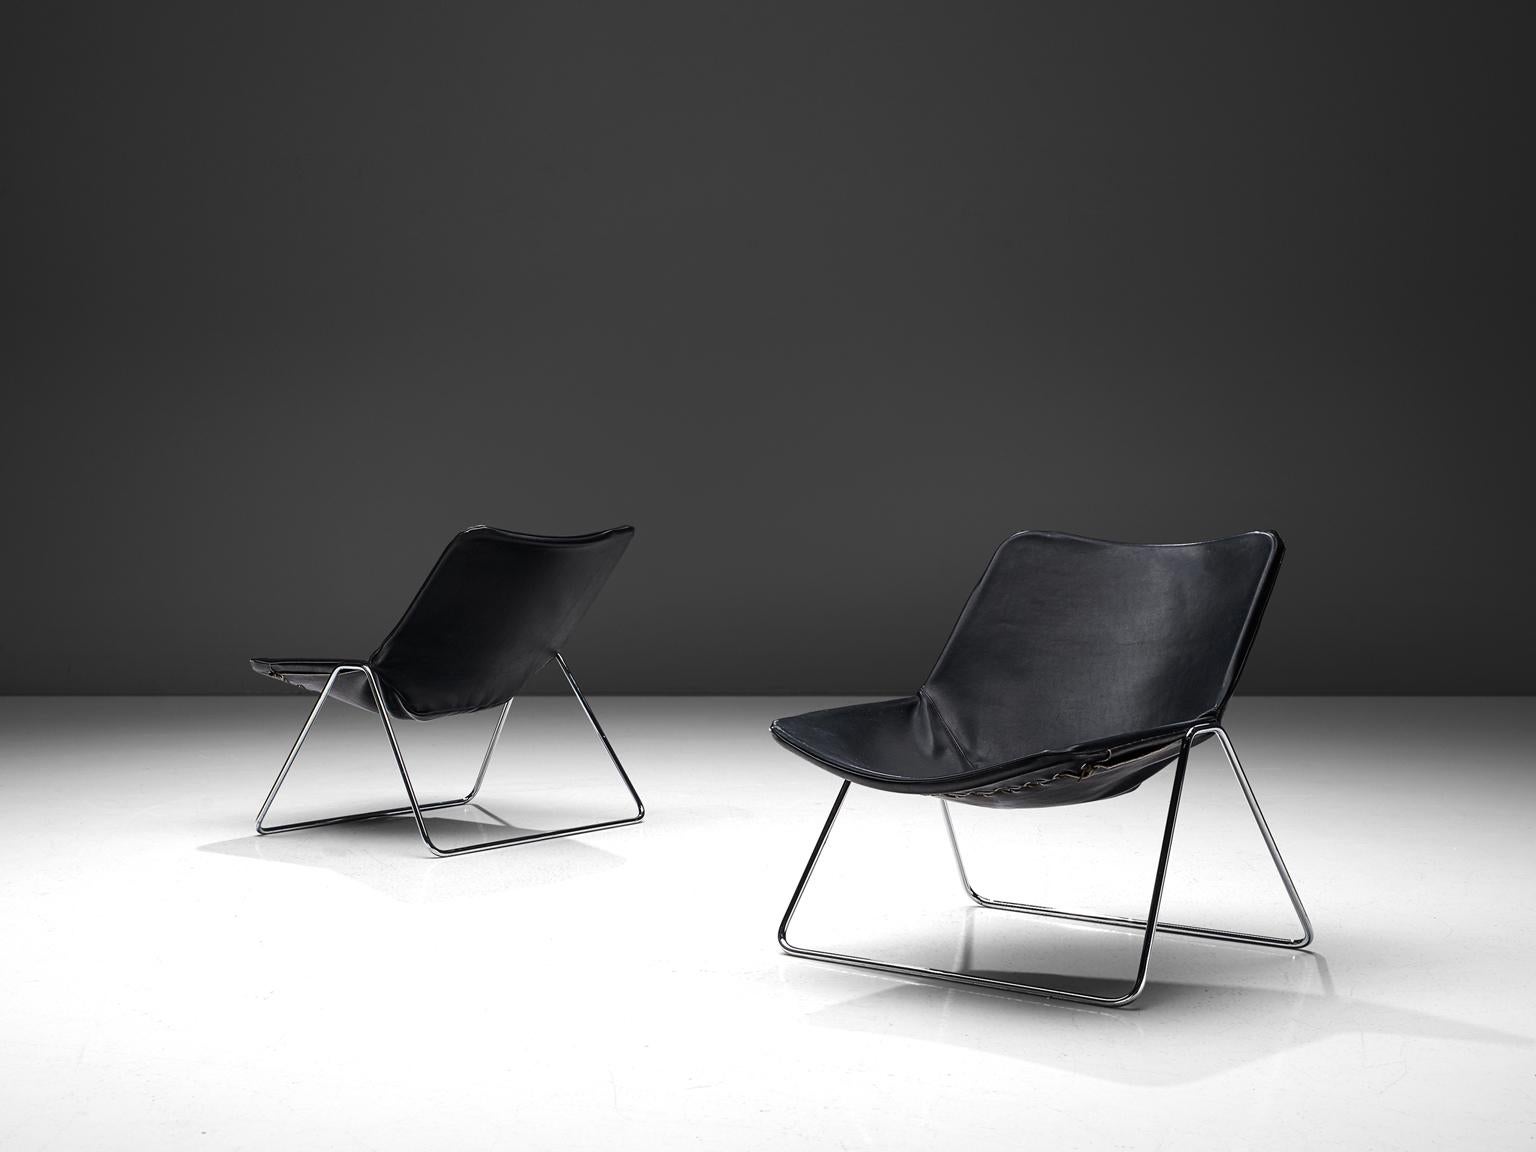 Pierre Guariche for Airborne, set of two G1 lounge chairs, lacquered steel and black leather, design from 1953.

This wonderful set of G1 Lounge chairs are designed by Pierre Guariche in 1953 for Airborne. The simplistic and modern design consist